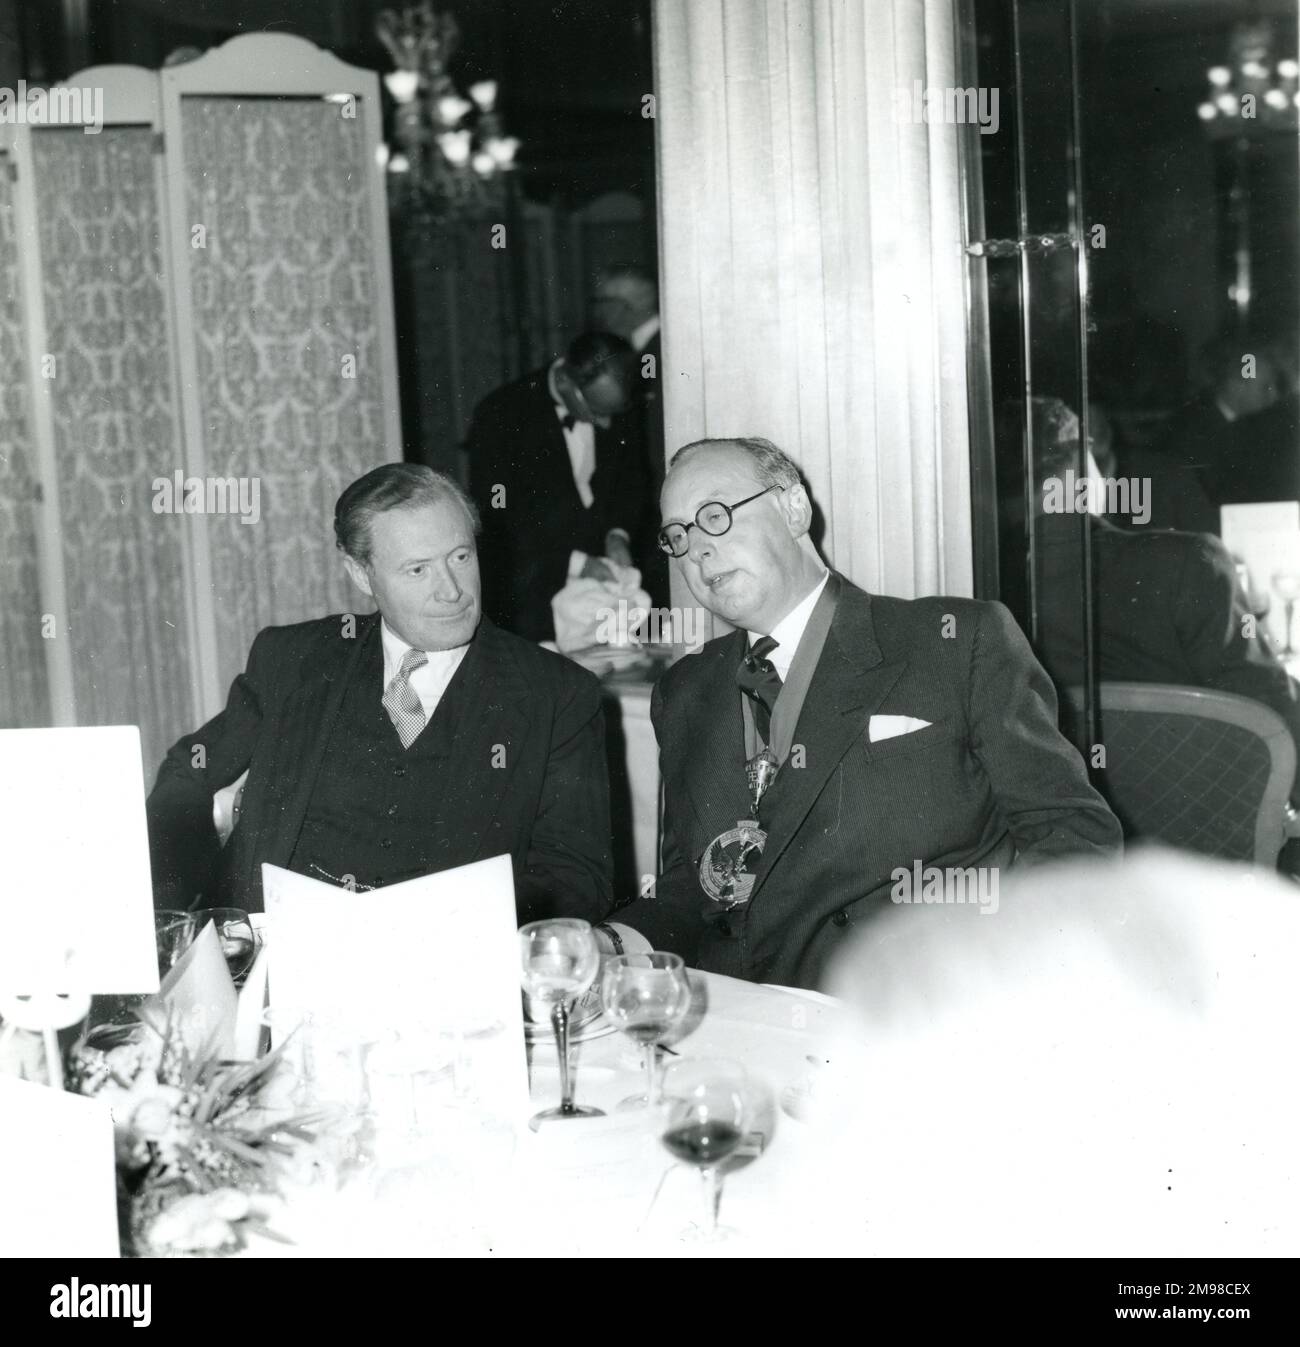 From left: Duncan Sandys, Minister of Aviation, and Peter Masefield, RAeS President 1959-1960, both discussed the White paper on Defence in their speeches at the 94th Anniversary Luncheon at the Dorchester Hotel, London, on 12 January 1960. Stock Photo